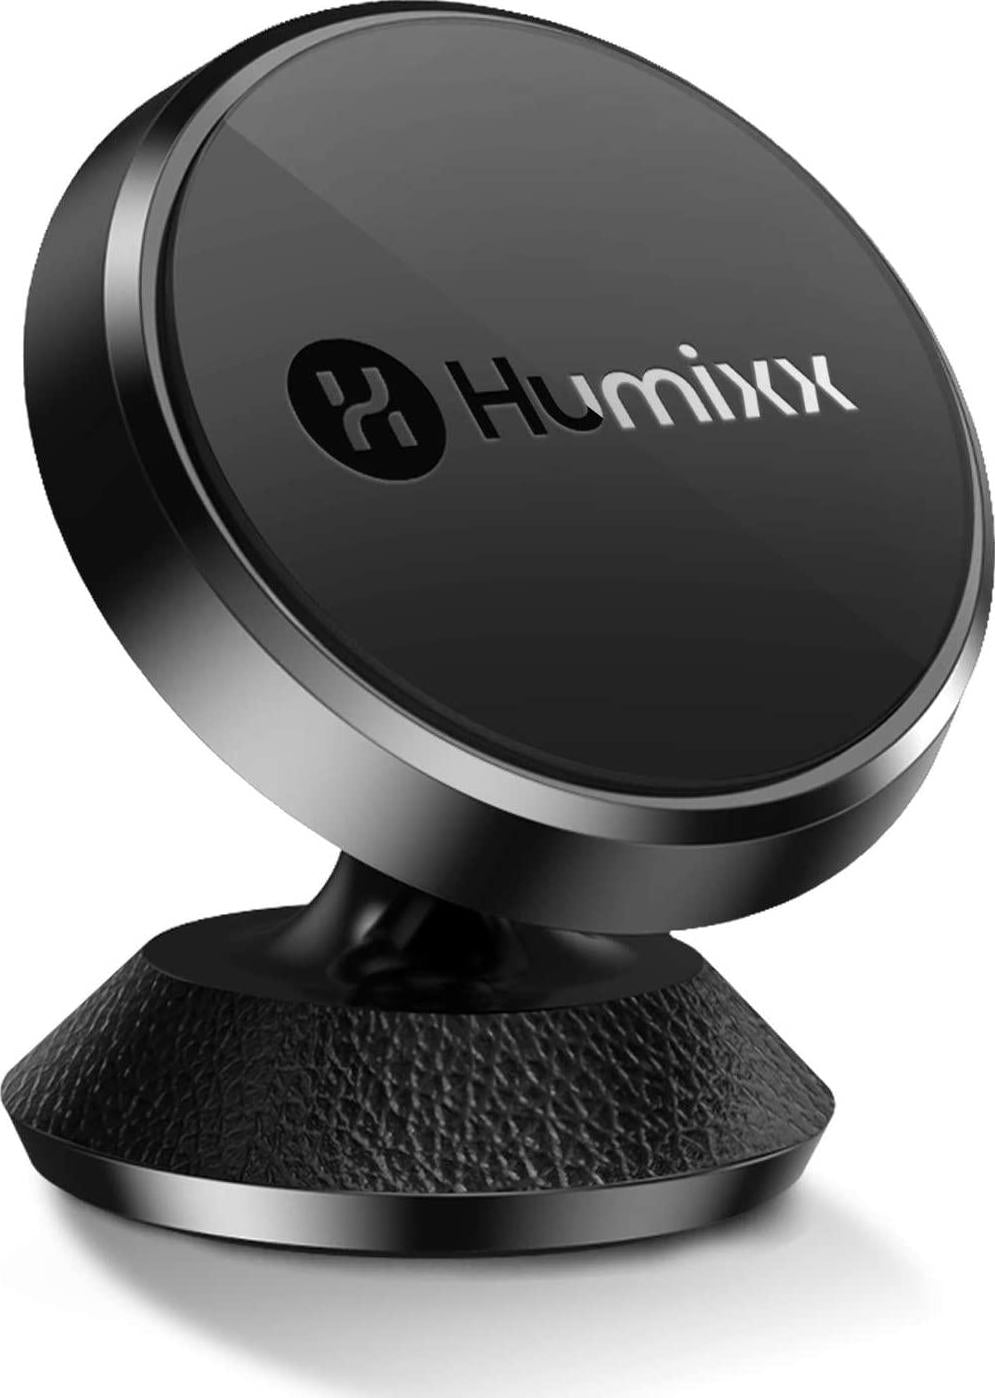 humixx, Magnetic Car Phone Holder, Humixx Vertical Car Phone Mount Cellphone Holder with Strong Magnet for iPhone X/8/7/7P/6s/6P/5S,Galaxy S5/S6/S7/S8, Google, LG, Huawei and More-Leather Black, 3-Pack